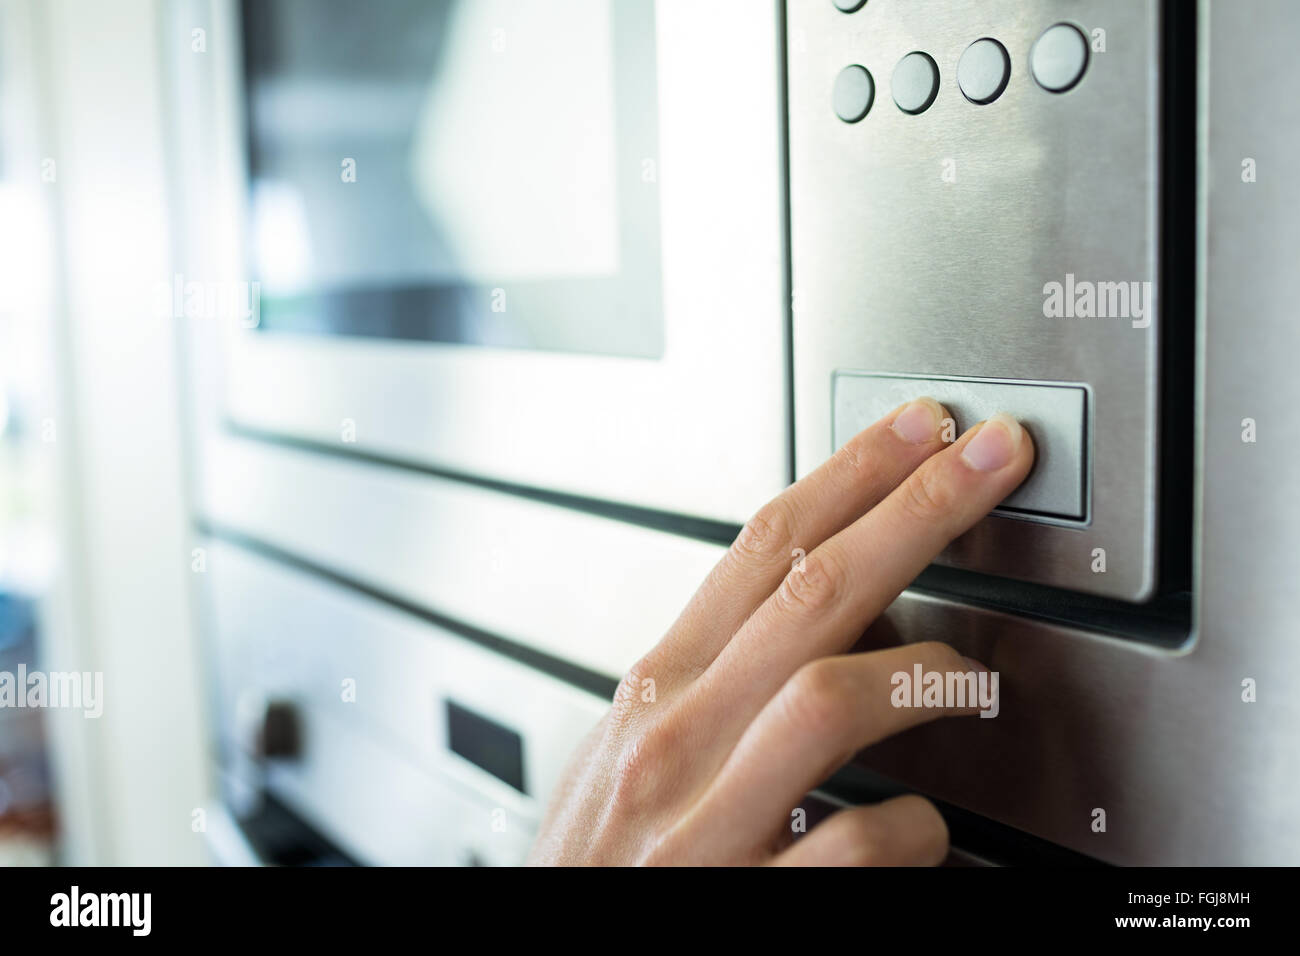 Woman setting up the oven Stock Photo